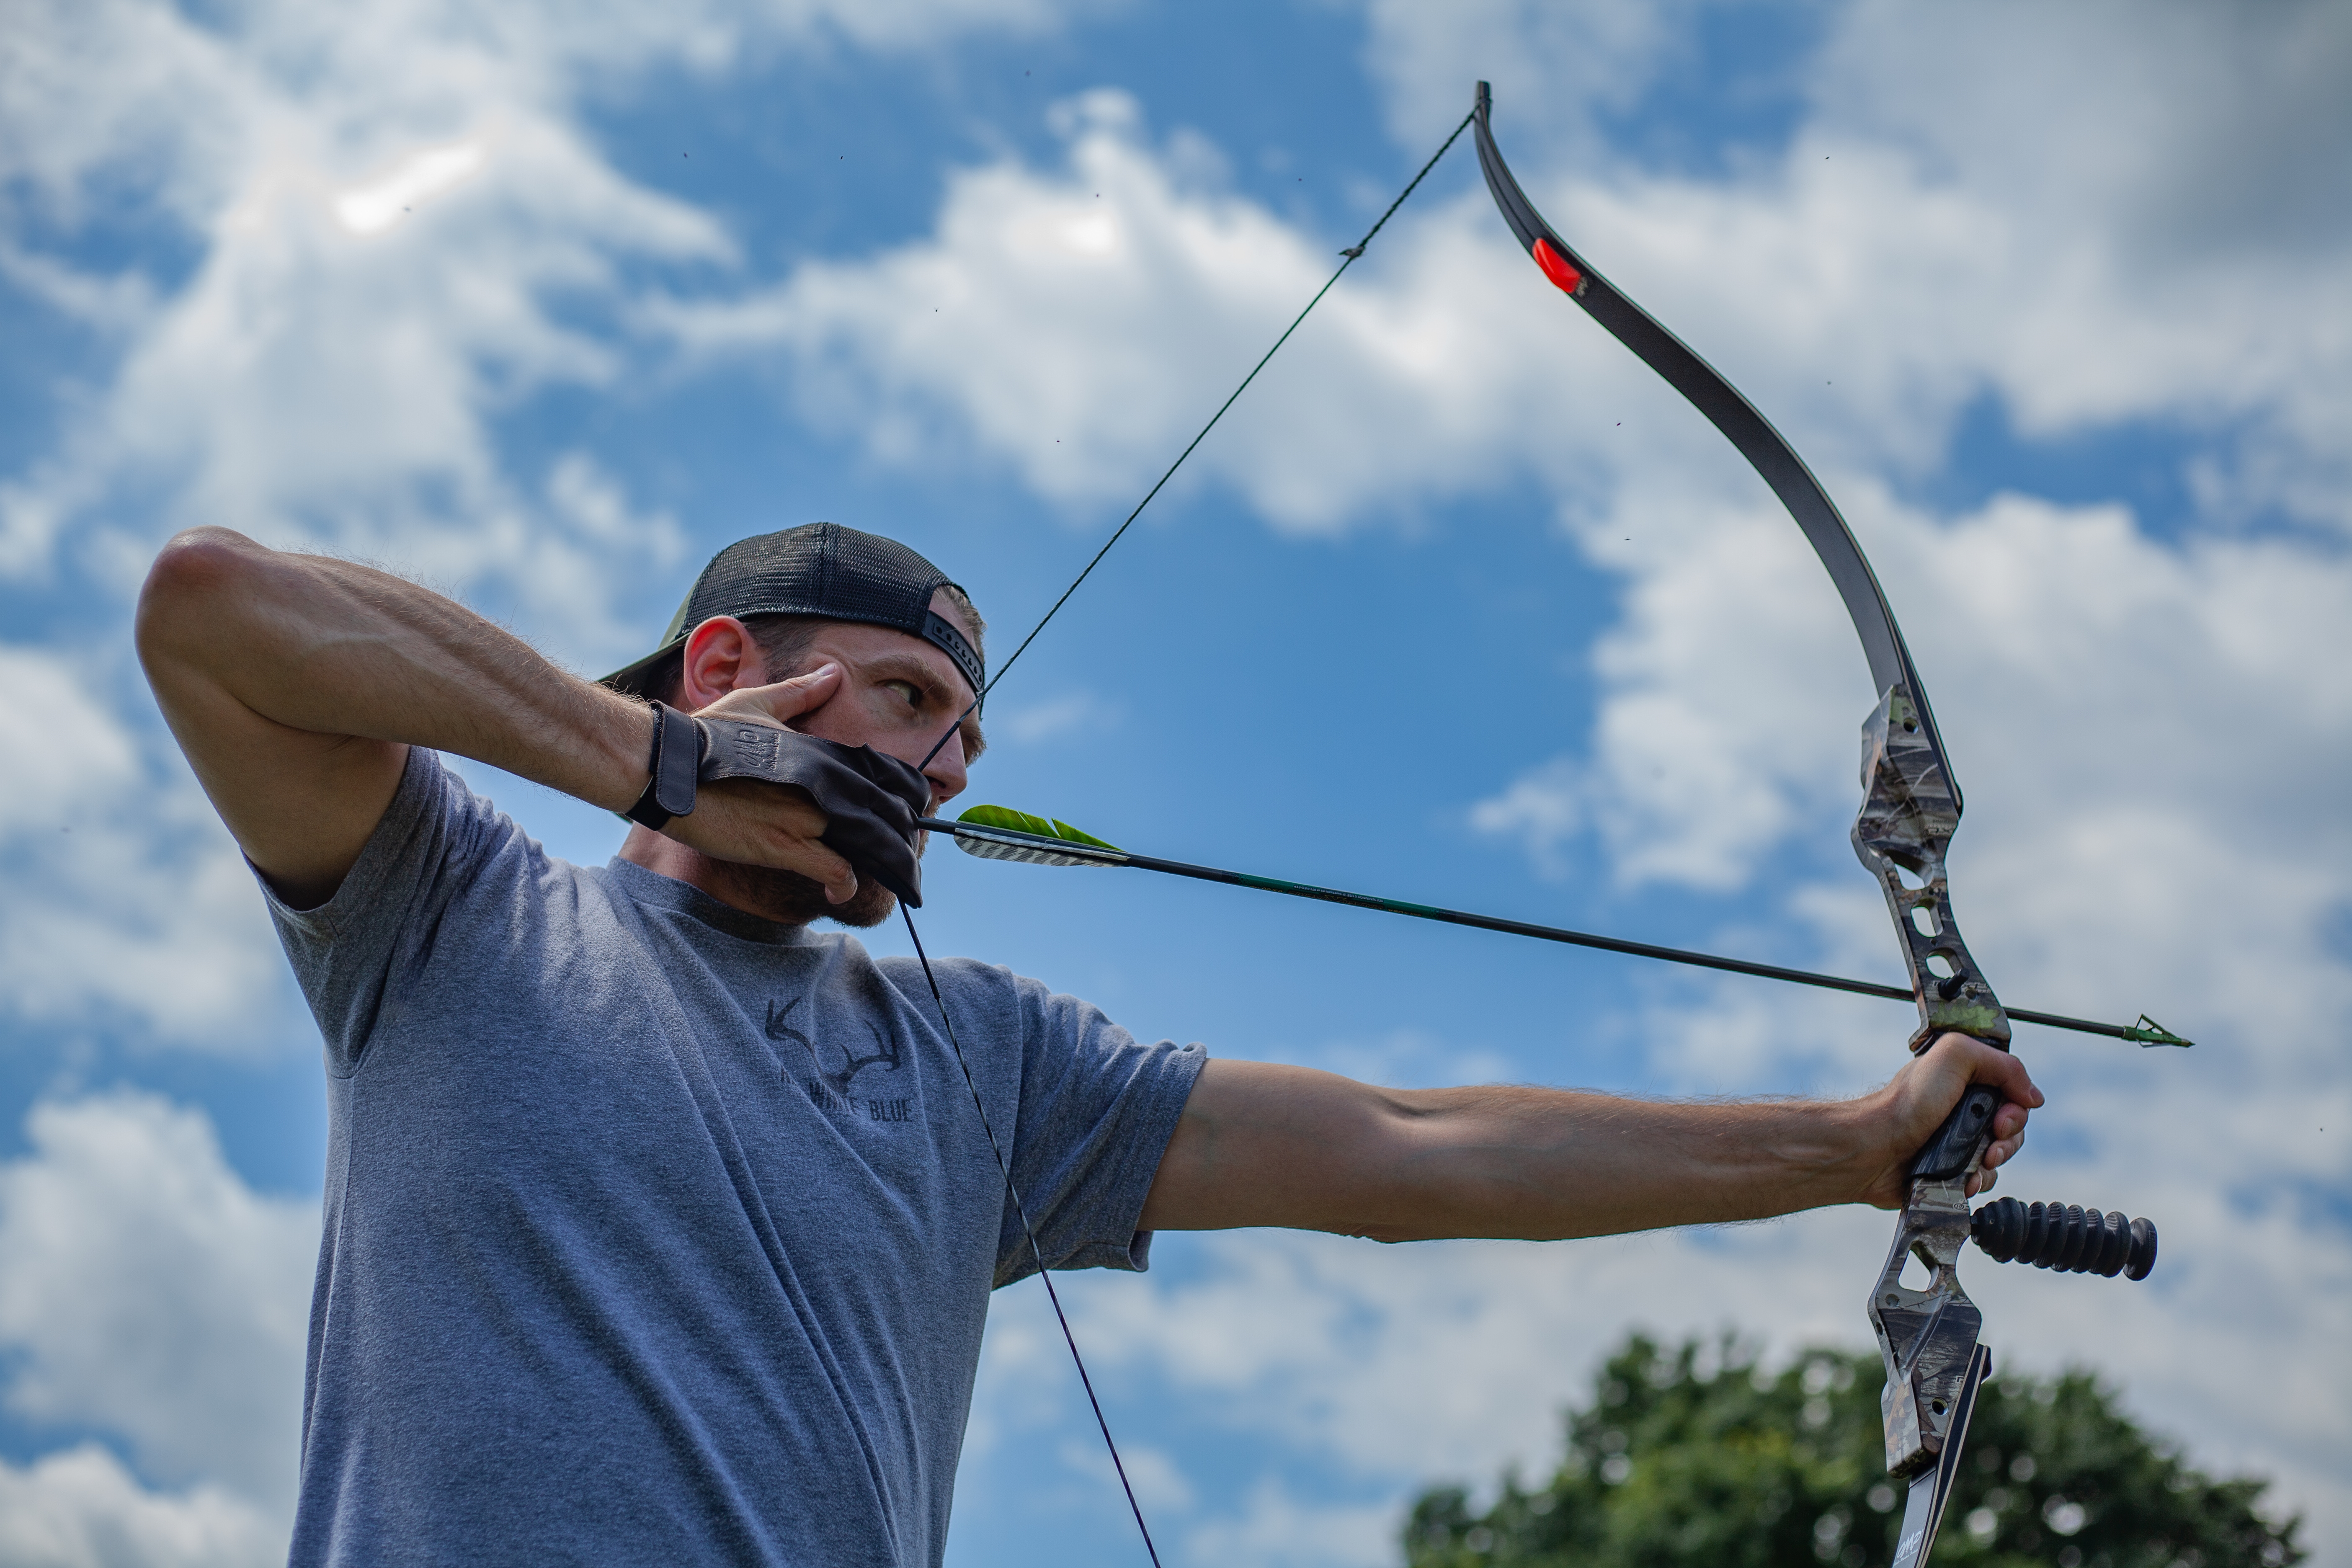 Can a Recurve Bow Kill a Human? 